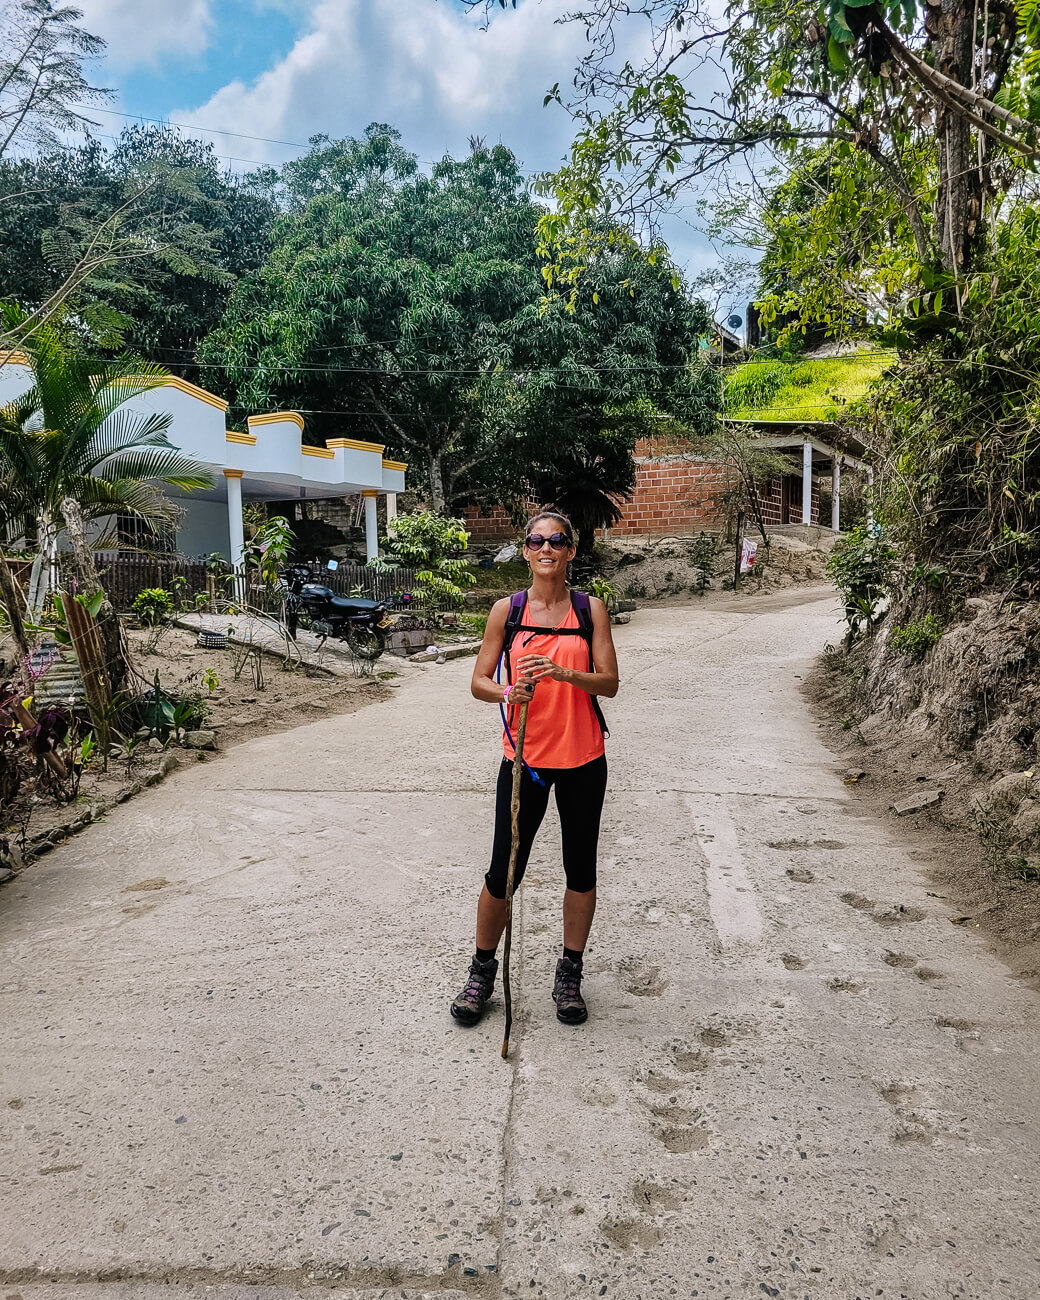 Deborah at starting point of the Lost City trek in Colombia